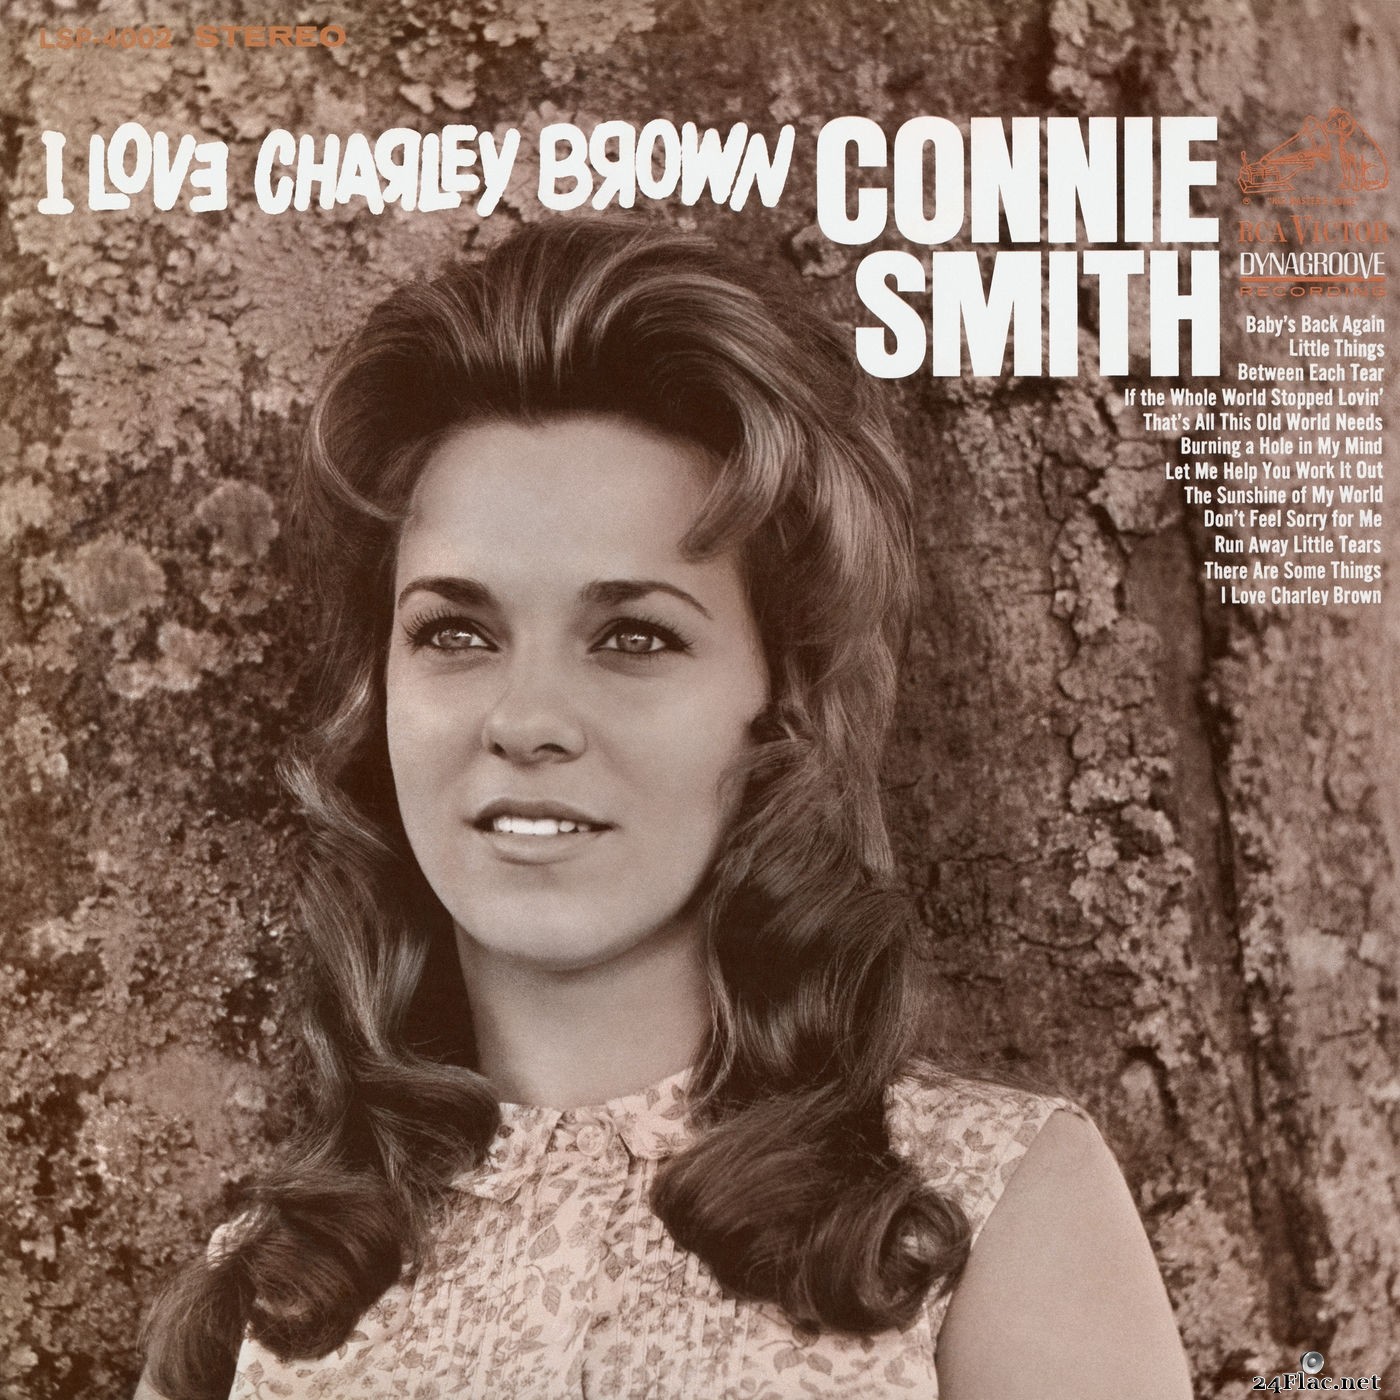 Connie Smith - I Love Charley Brown (2018) Hi-Res